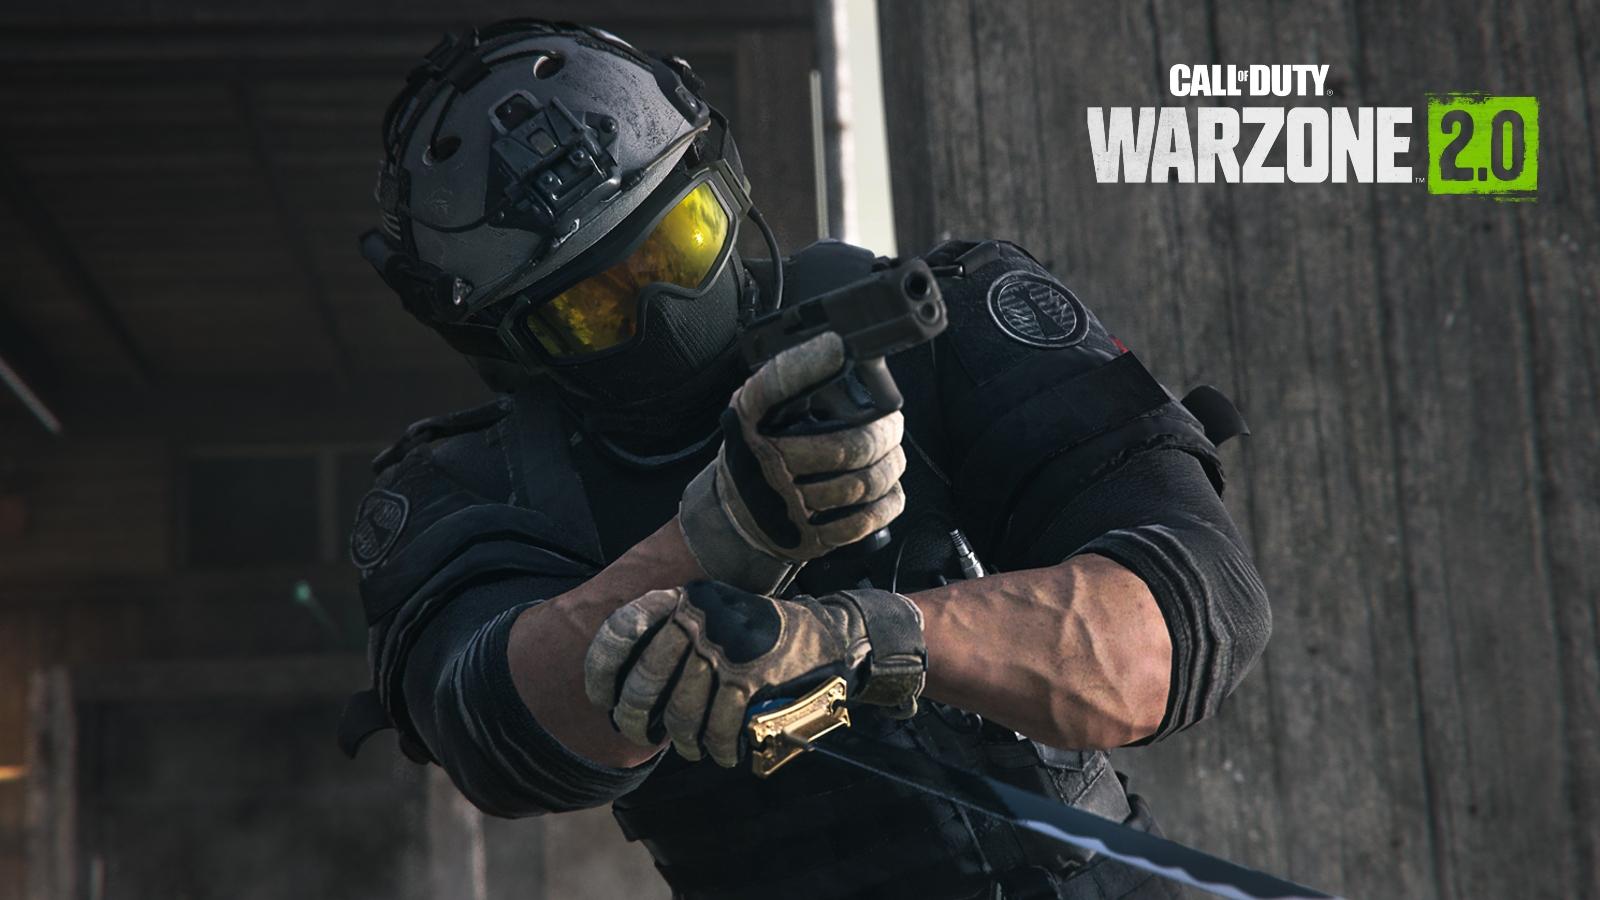 Warzone 2.0 Season 3 update patch notes - Here's what's new in Call of Duty, Gaming, Entertainment